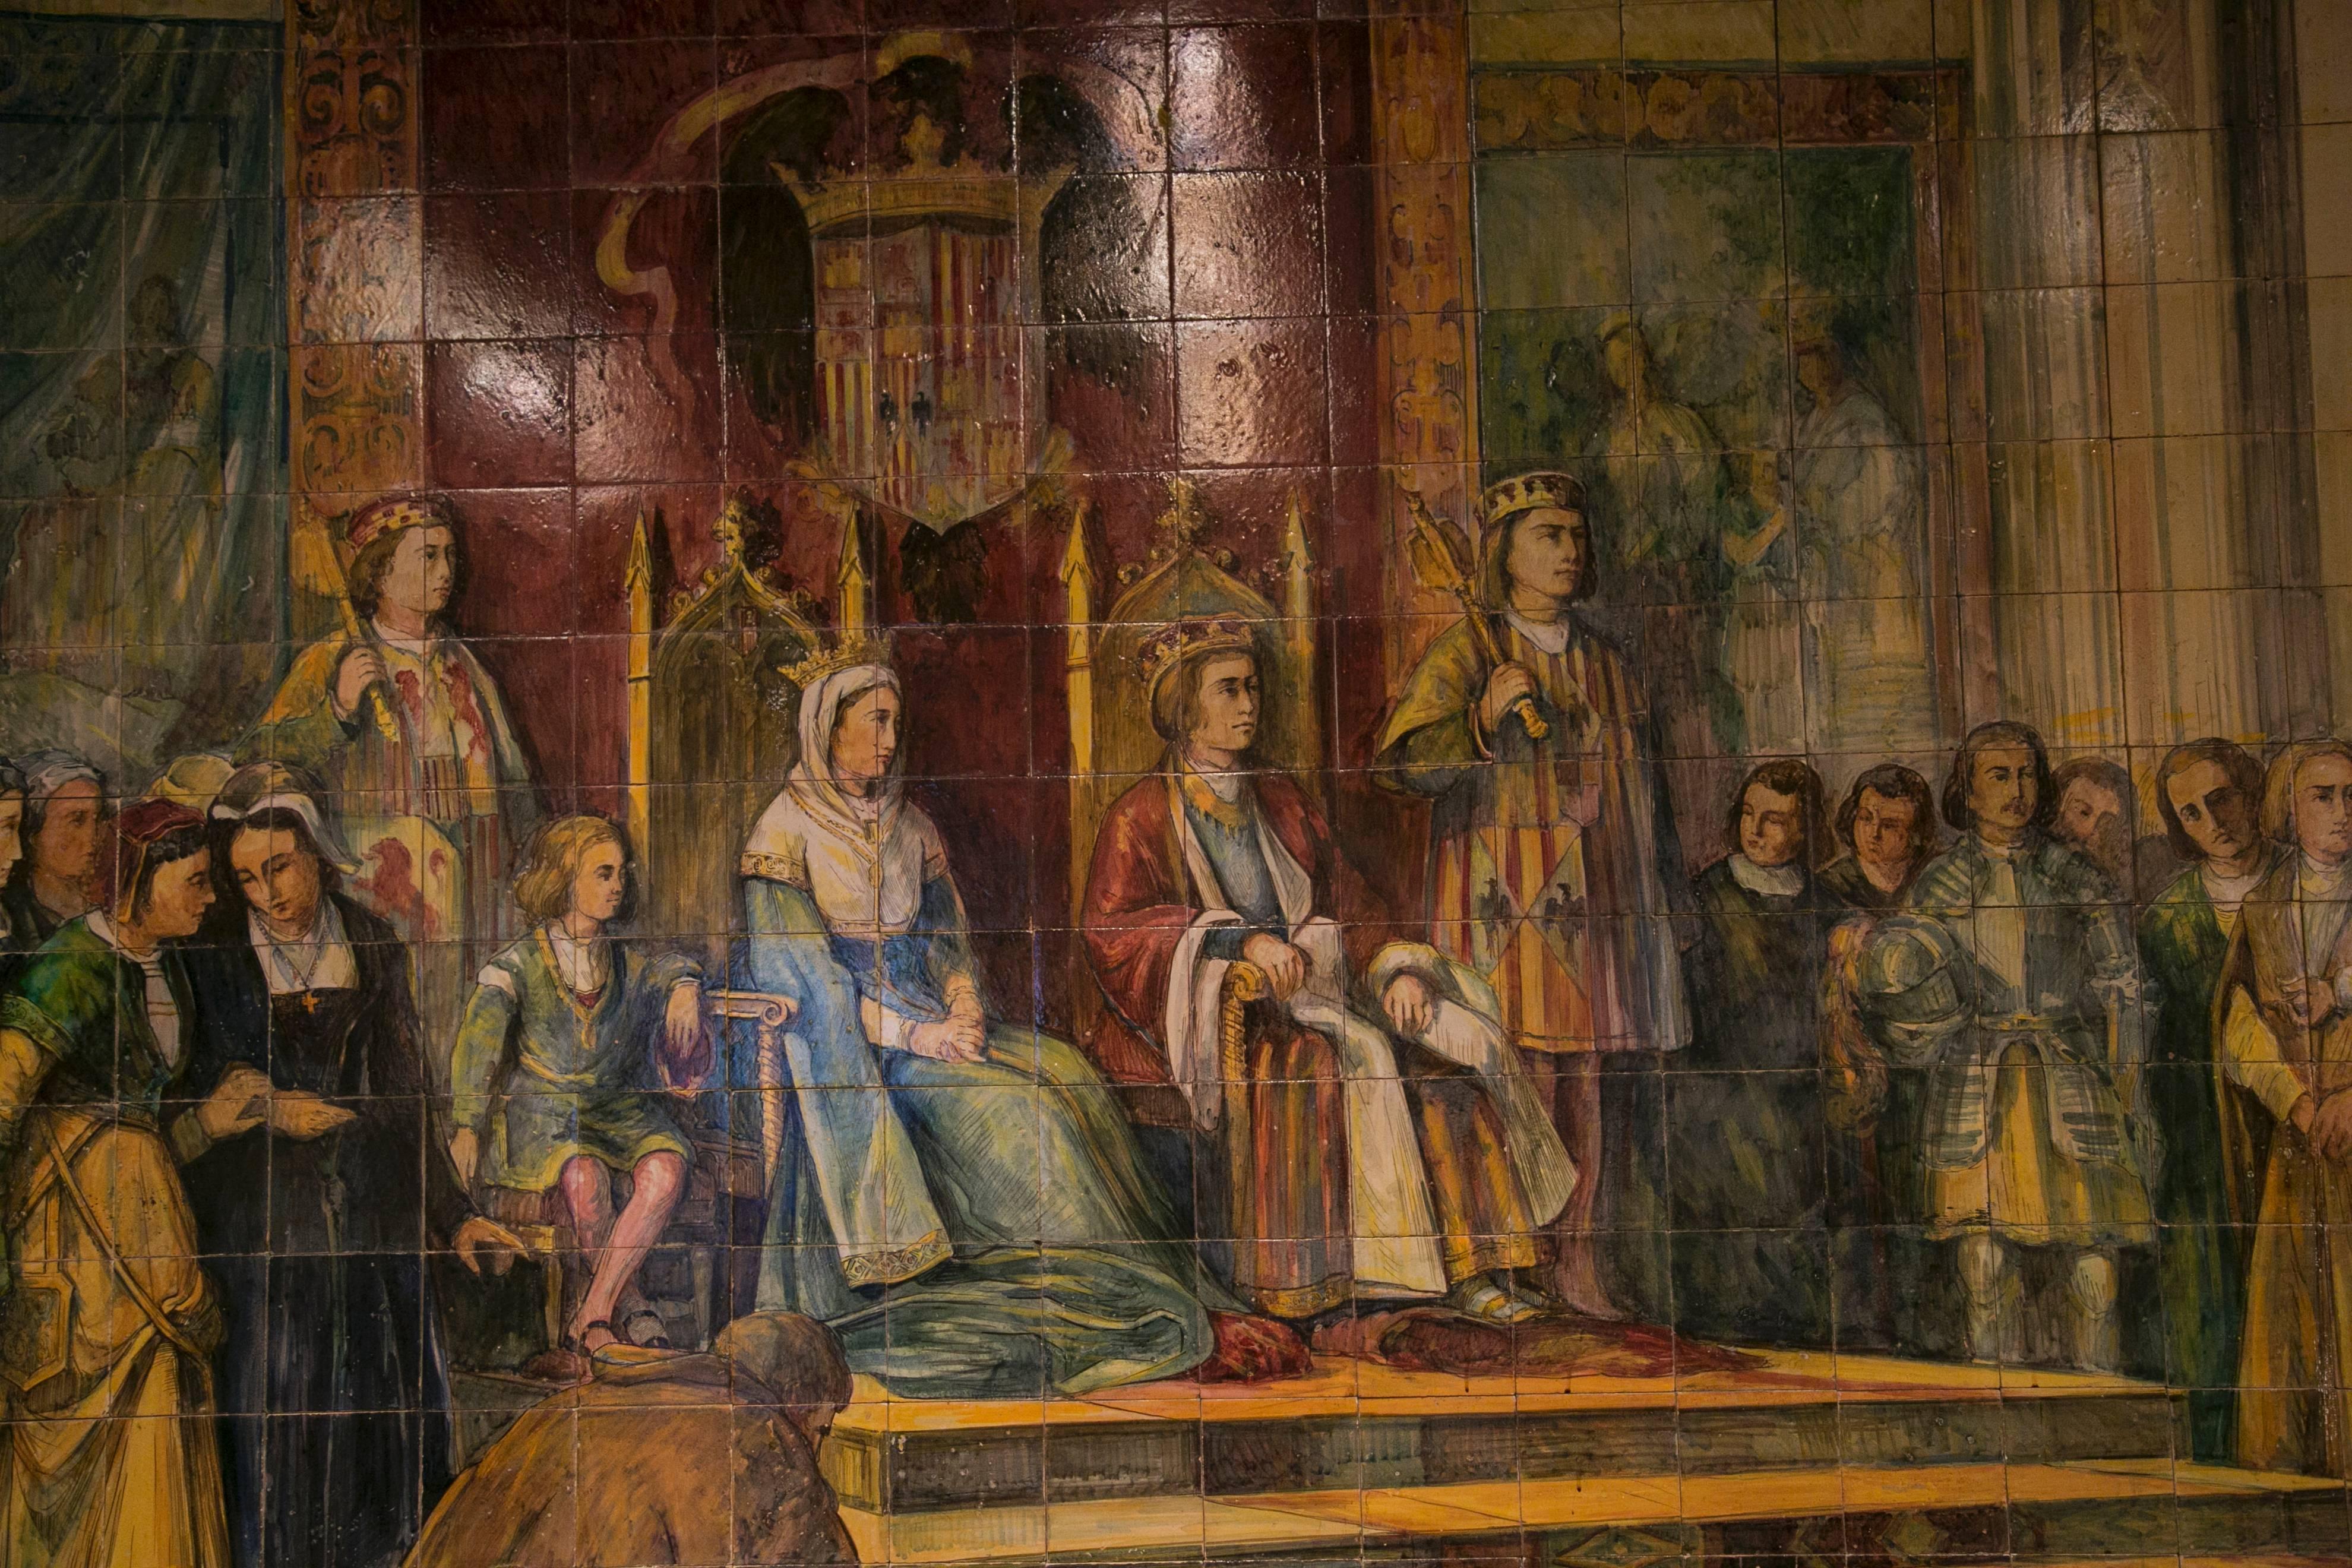 Large tile panel representing Columbus, showing his discoveries in the new world to the sovereigns of Spain, Queen Isabella and Ferdinand of Aragon.

It was made by the ceramist painter manuel corrales from the late 19th century and early 20th